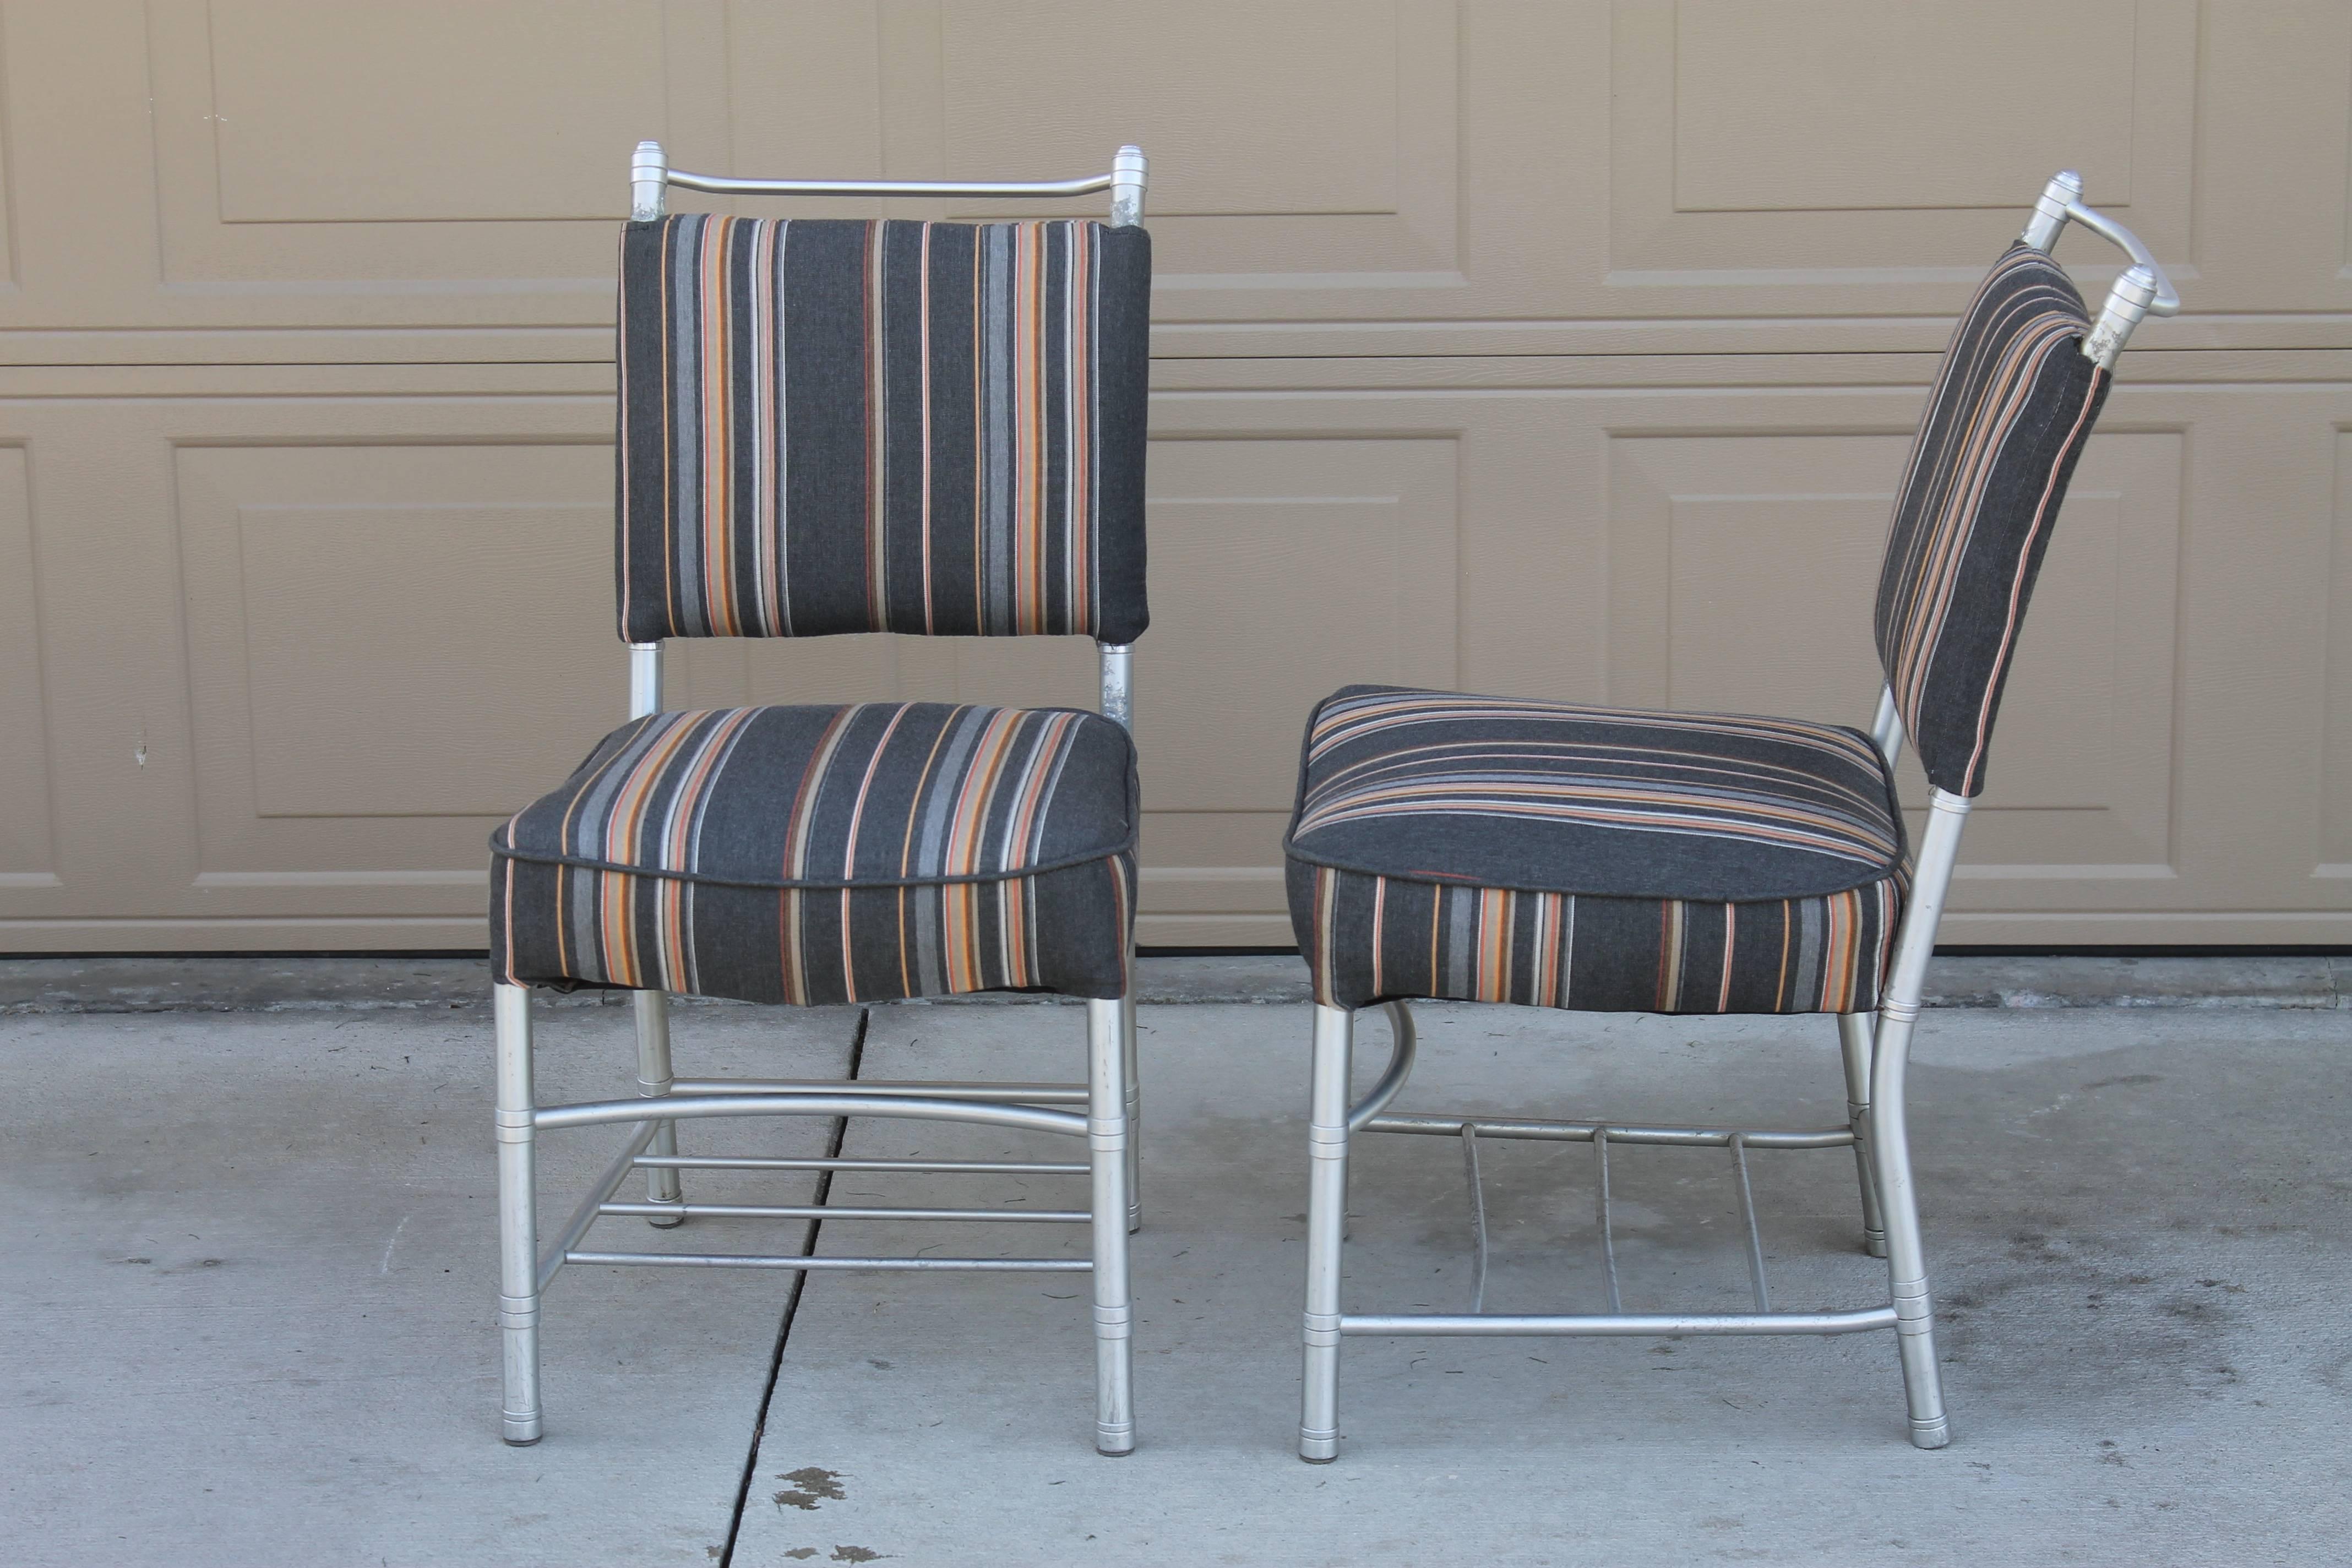 Four Warren McArthur dining chairs. The aluminium shows wear and one of the chairs is missing its cross bar (picture attached). They have been newly reupholstered. They measure 17.5